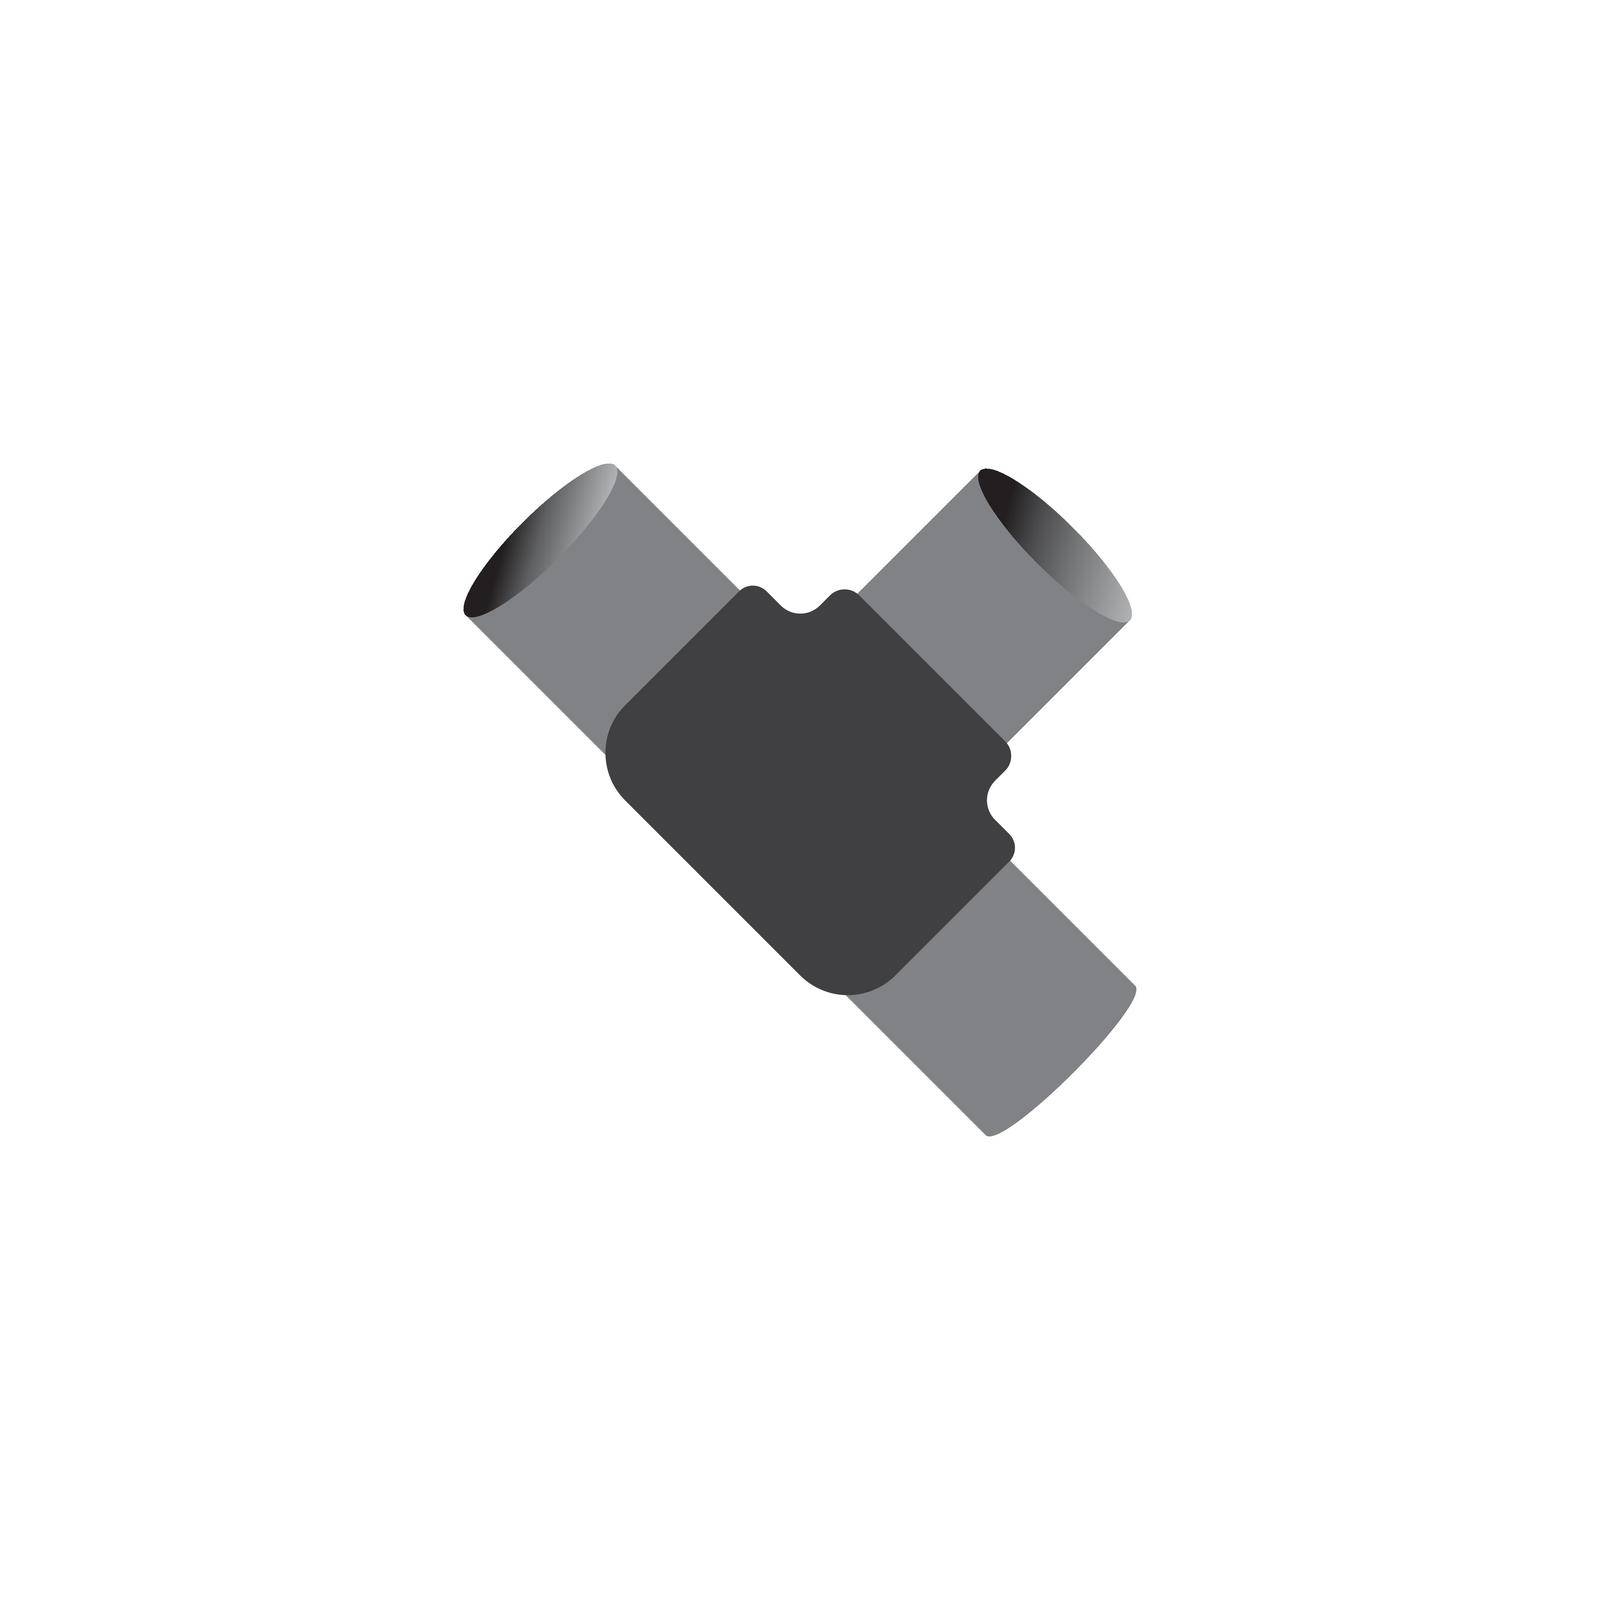 pipe connection icon by rnking